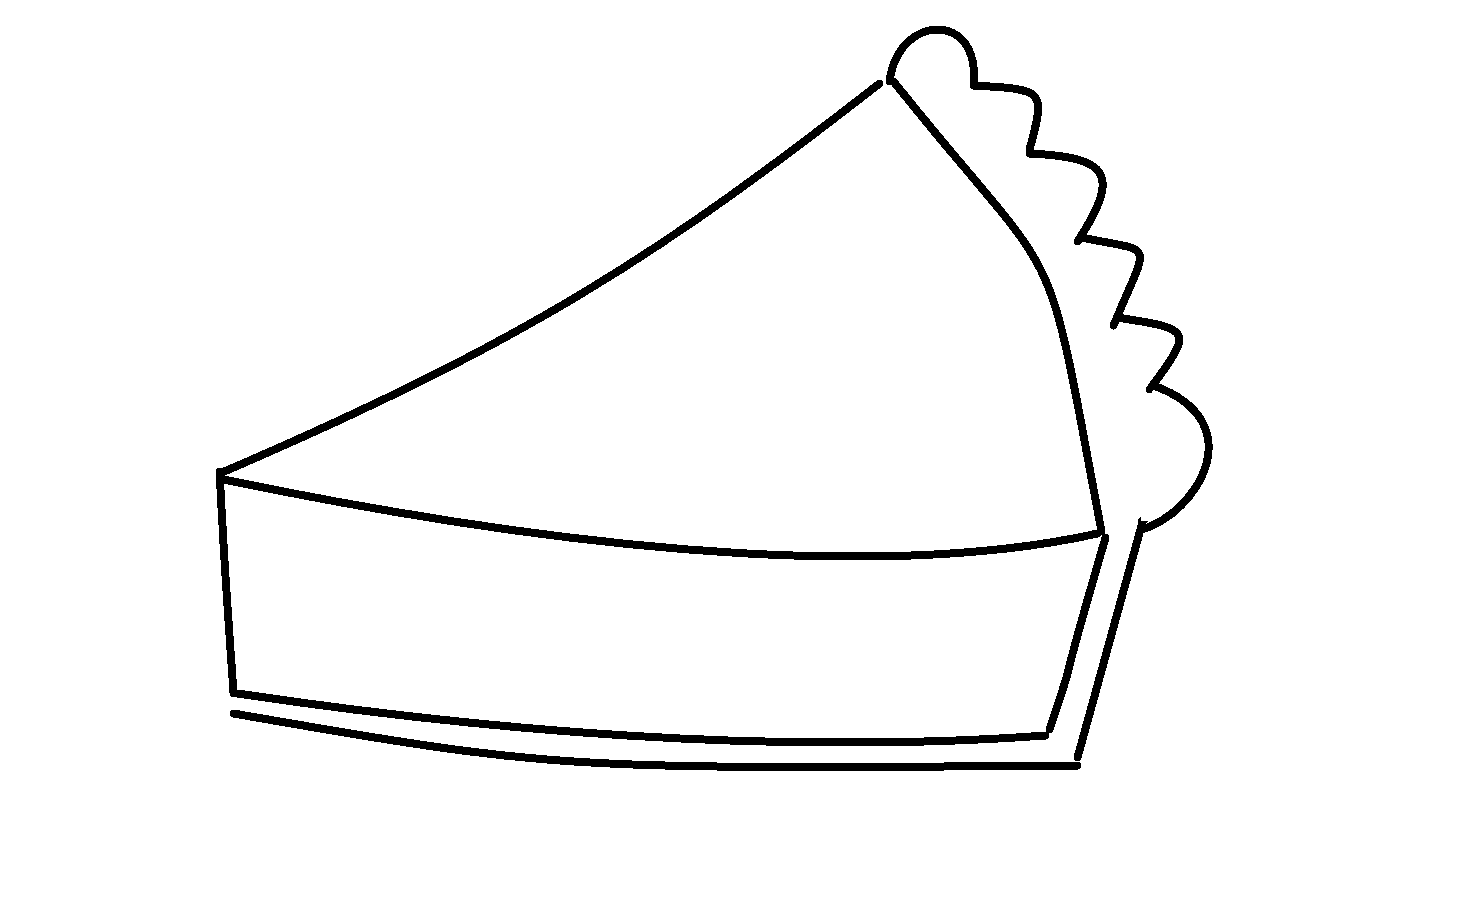 apple pie clipart black and white - photo #38